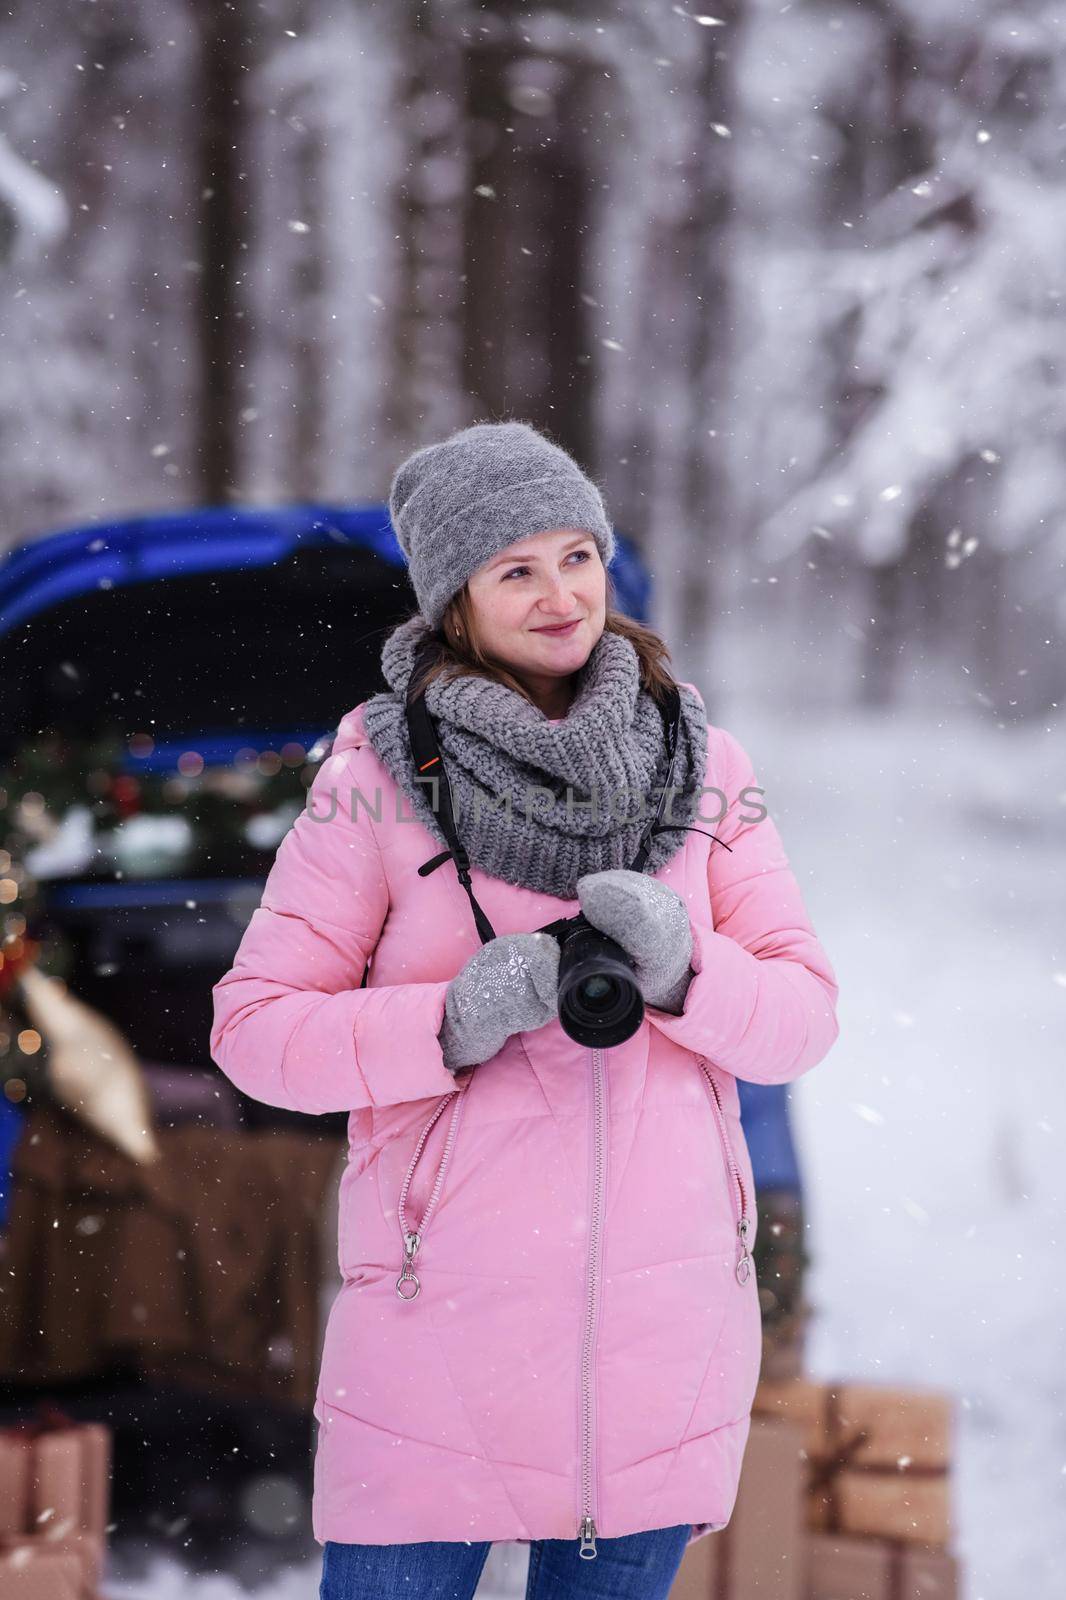 A woman in a winter snow-covered forest in the trunk of a car decorated with Christmas decor. by Annu1tochka